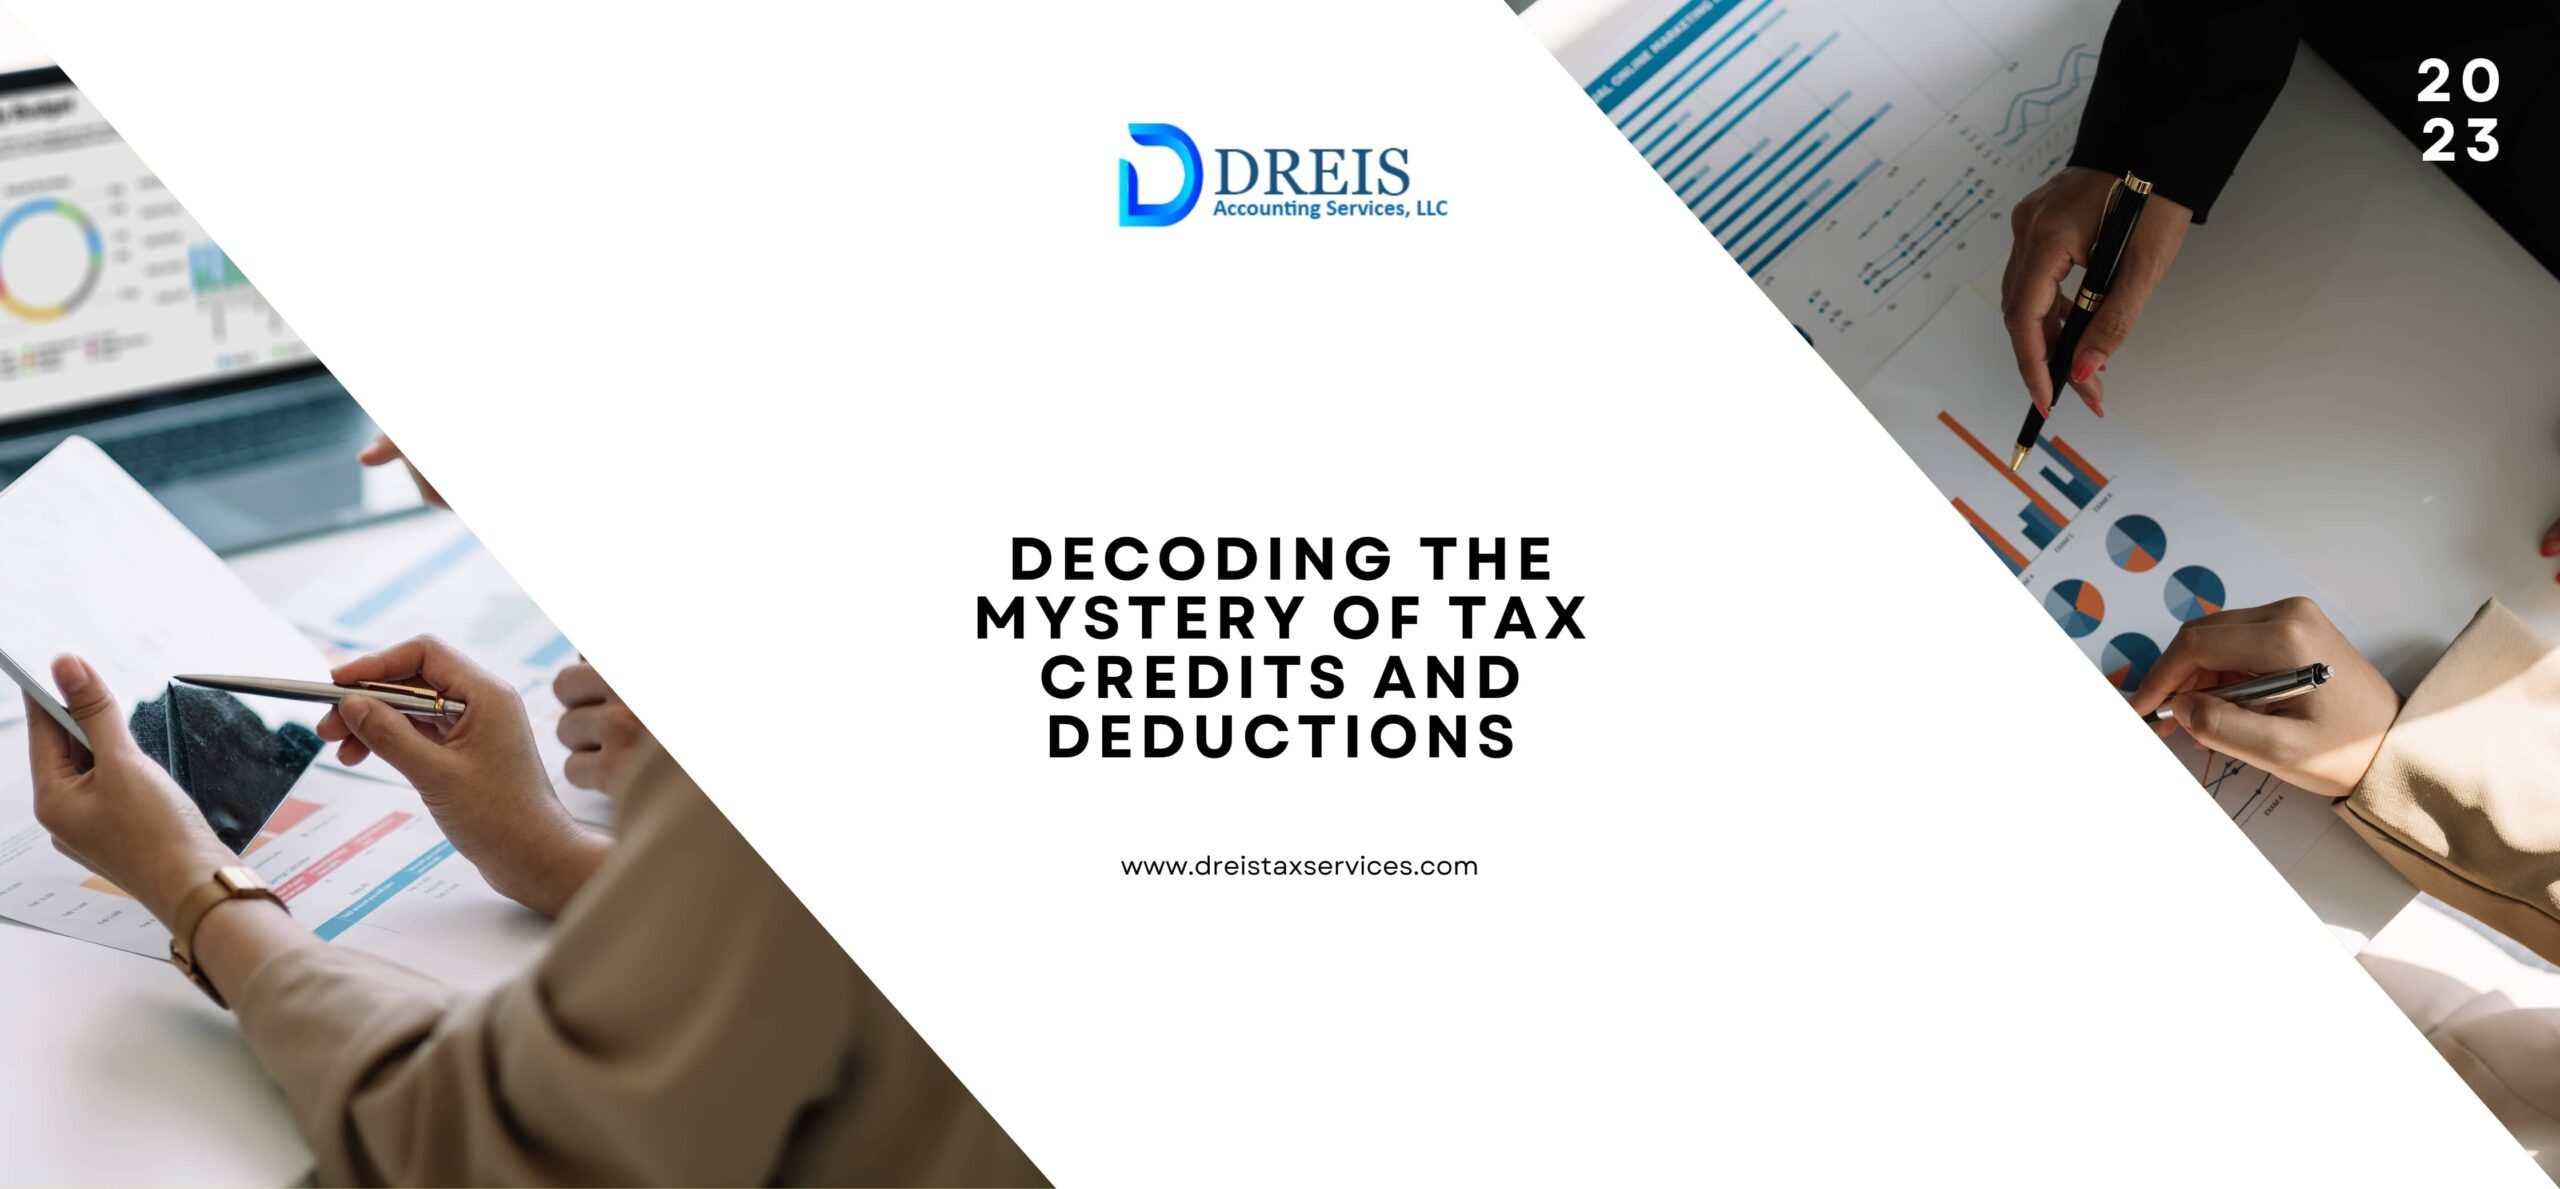 Decoding the Mystery of Tax Credits and Deductions